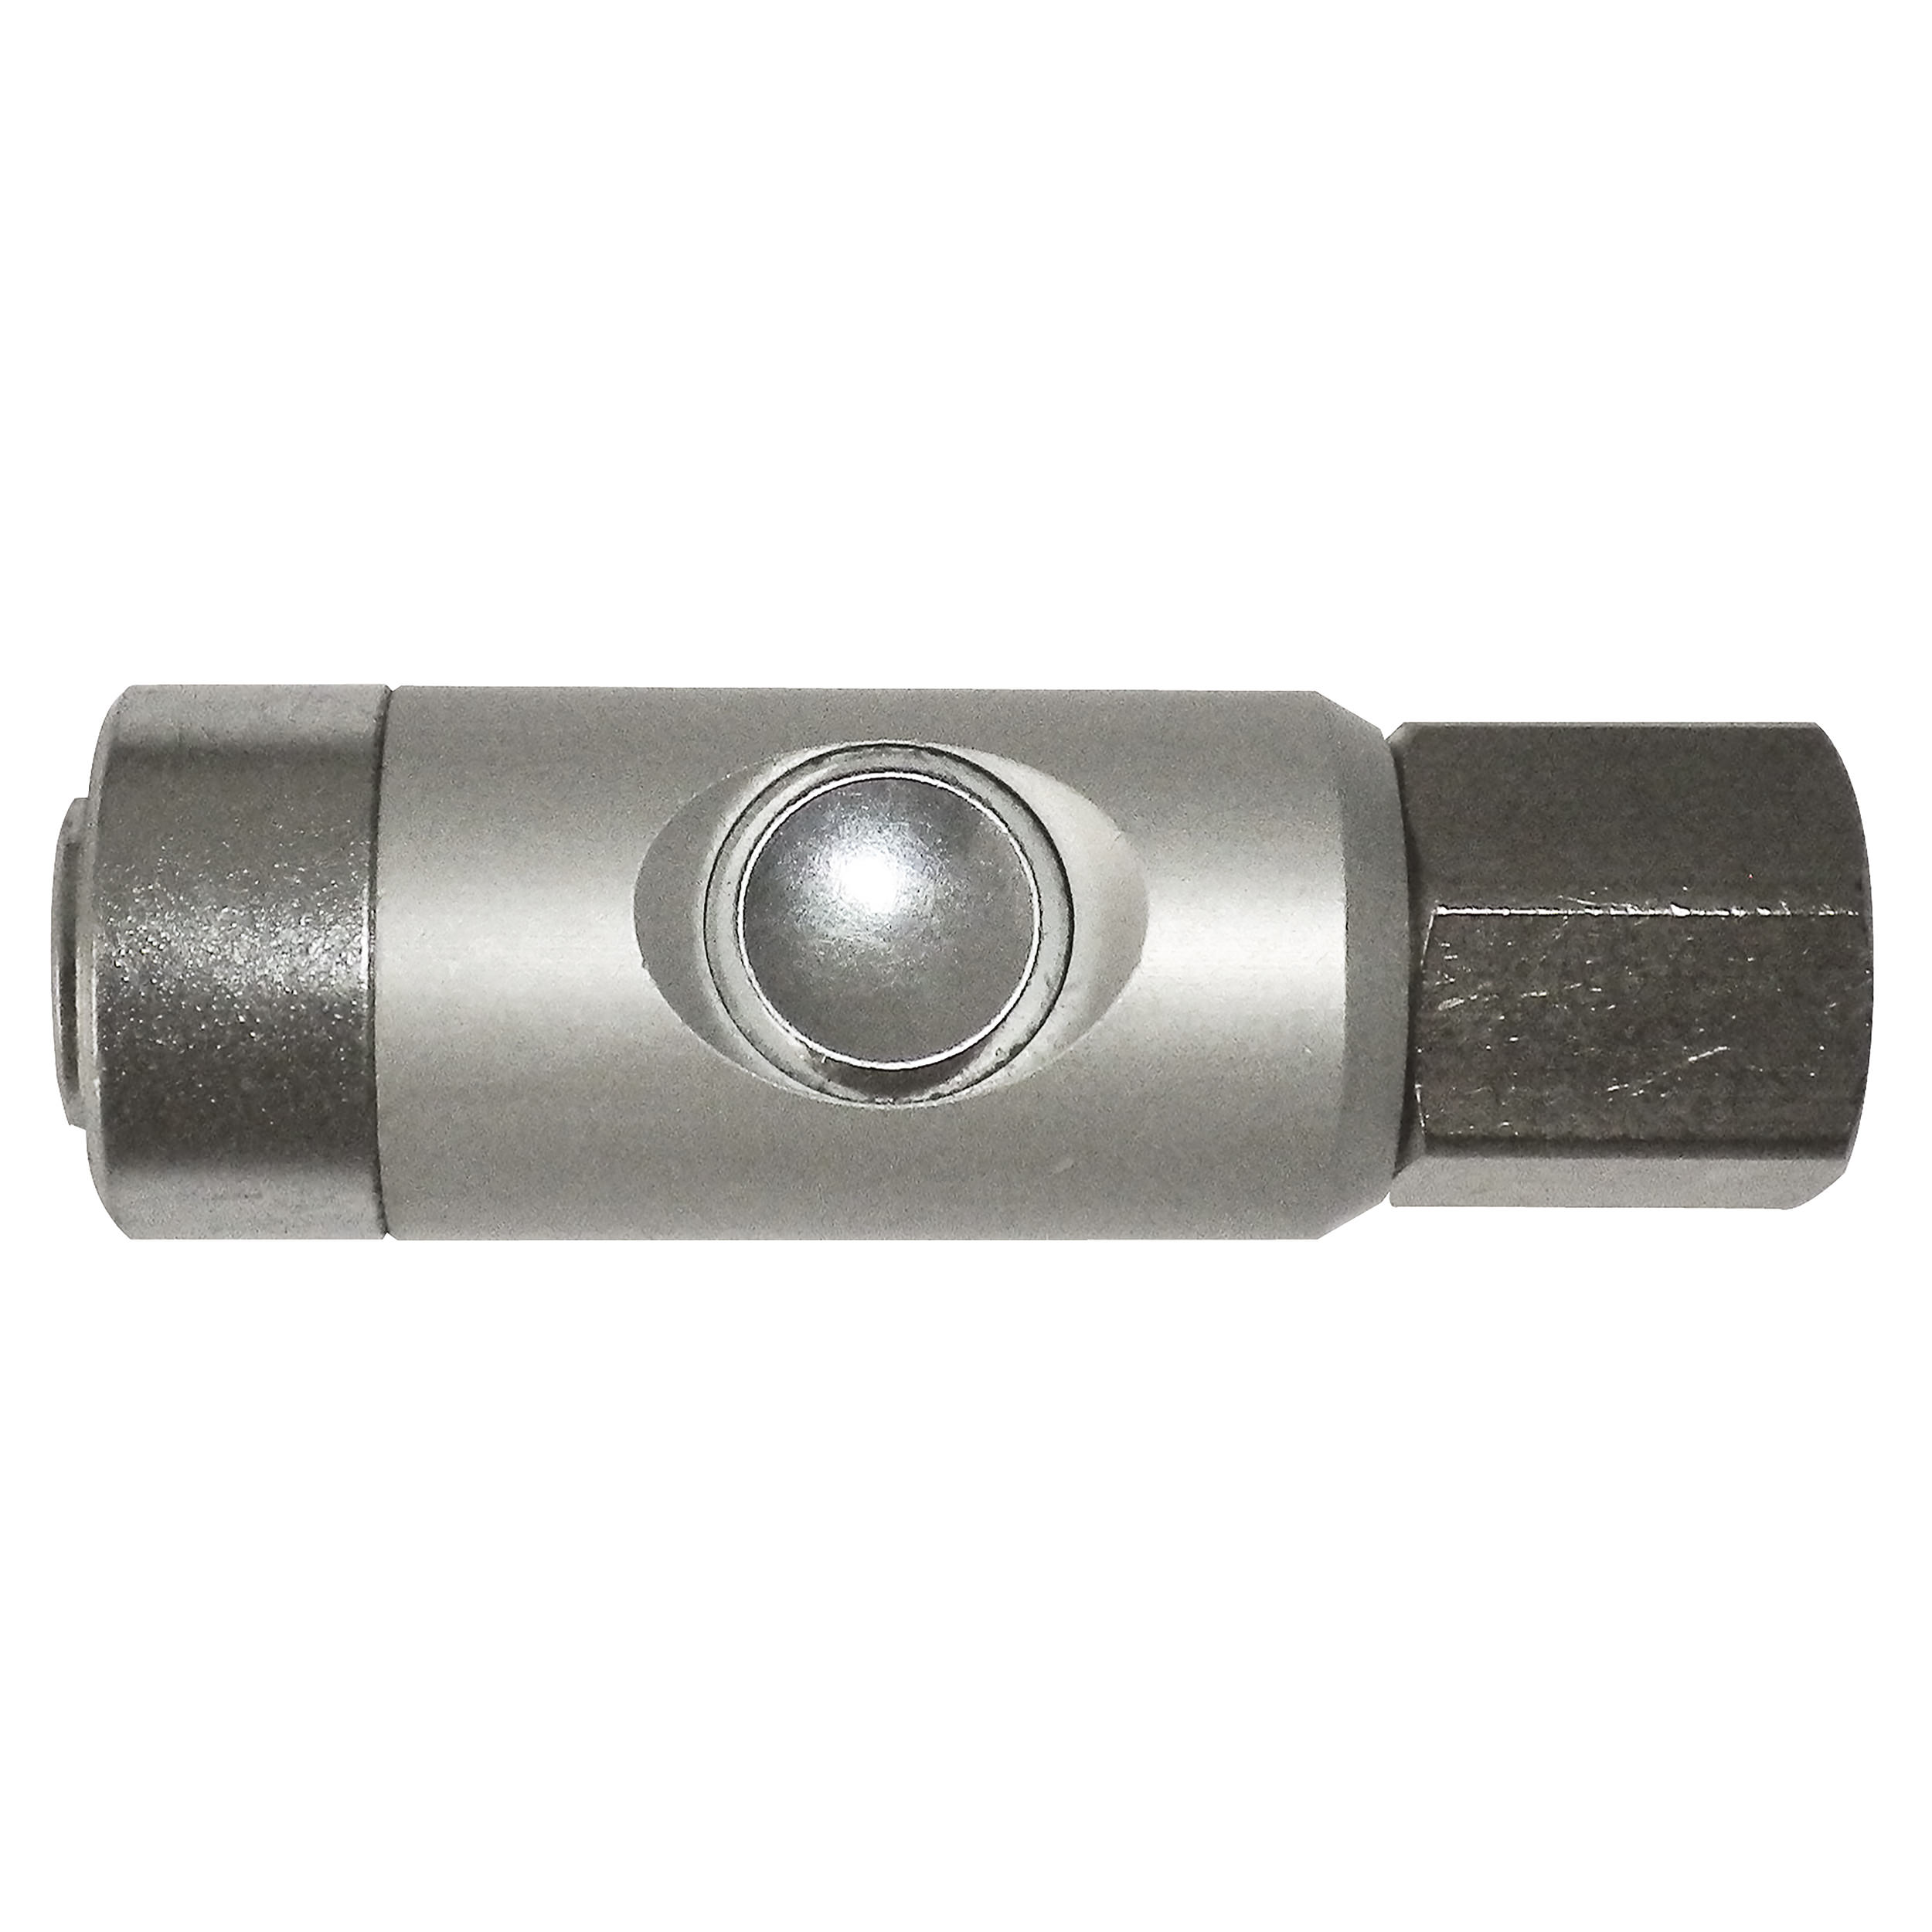 DN 5.5 safety coupling w. ARO profile, w. push button, QN: 1,000 Nl/min, MOP: 145 psi, G⅜ female, length: 77 mm, AF 20